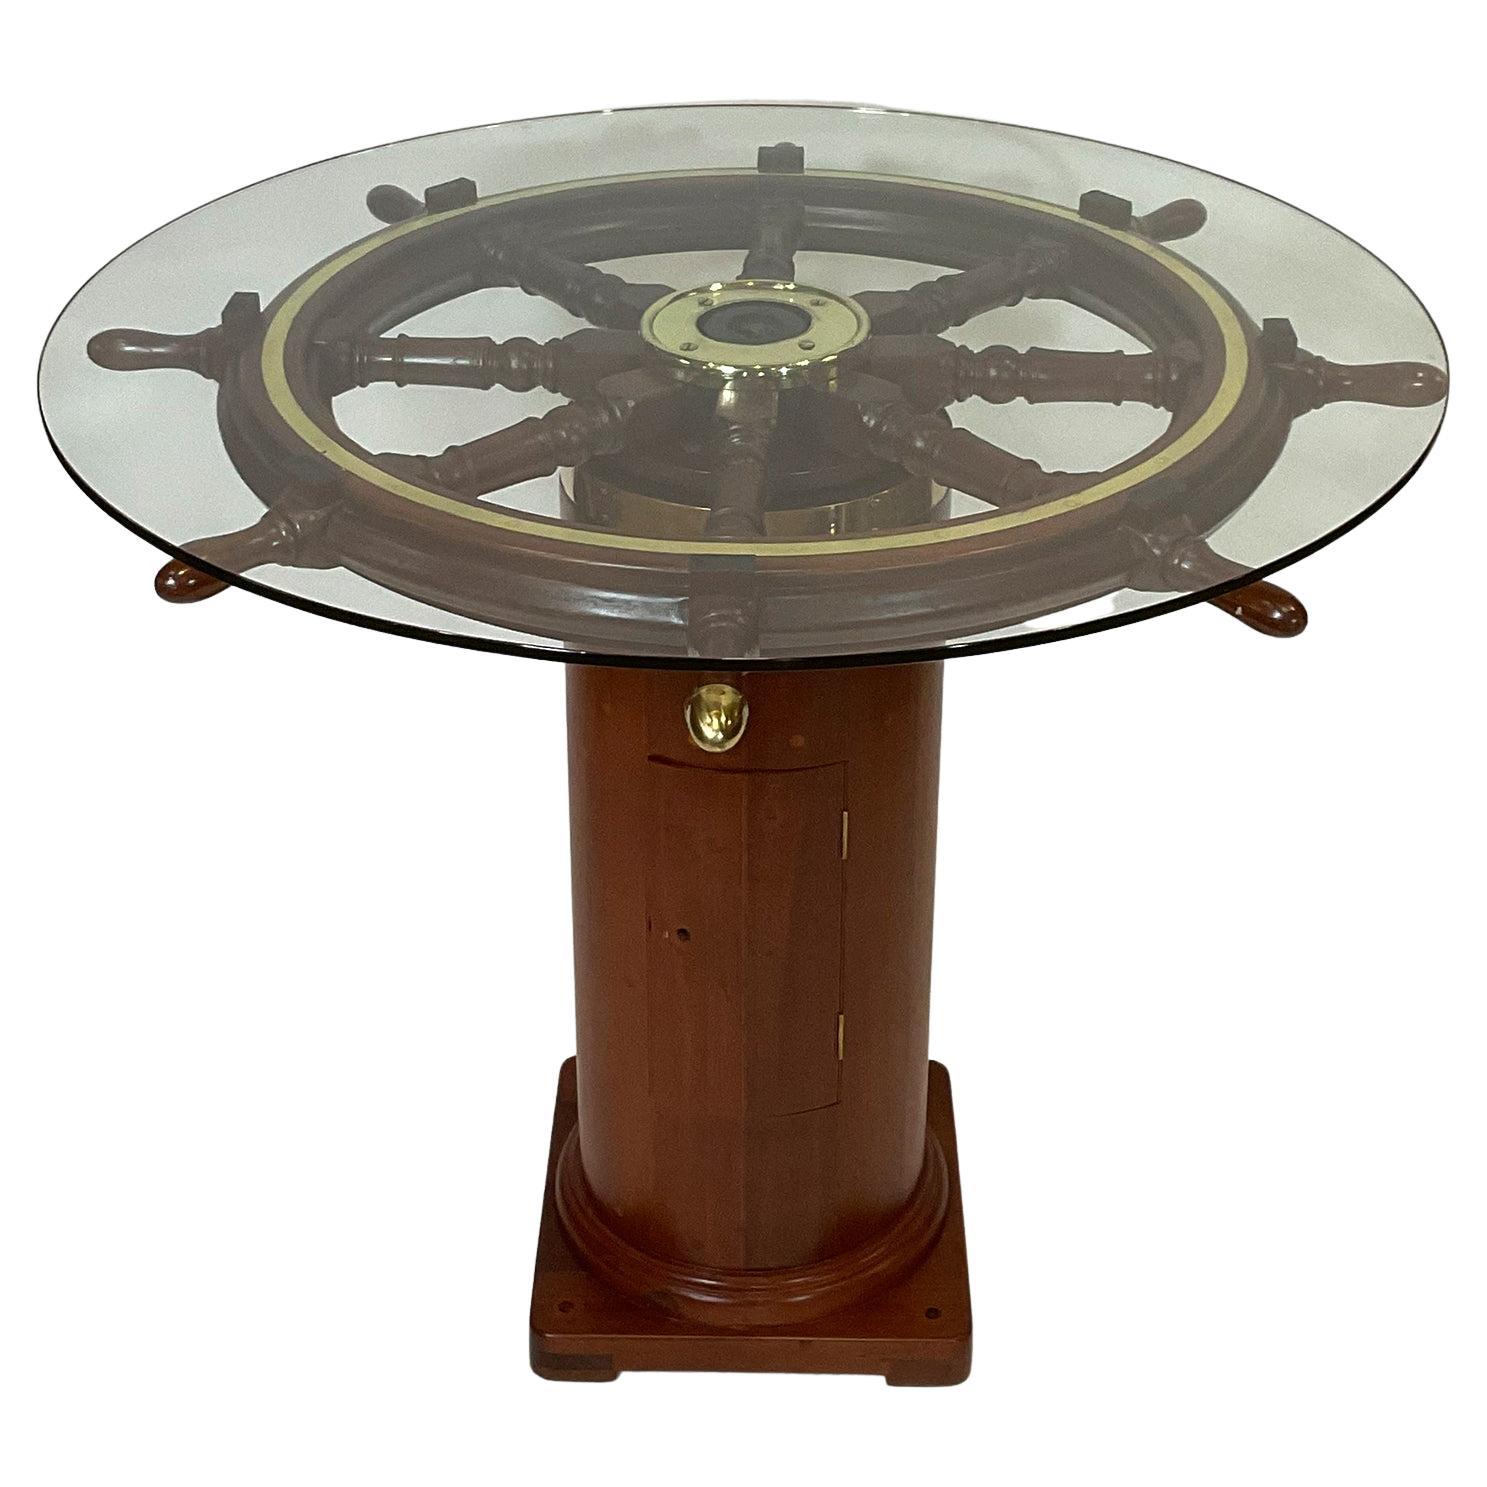 Amazing Ships Wheel Pub Table For Sale